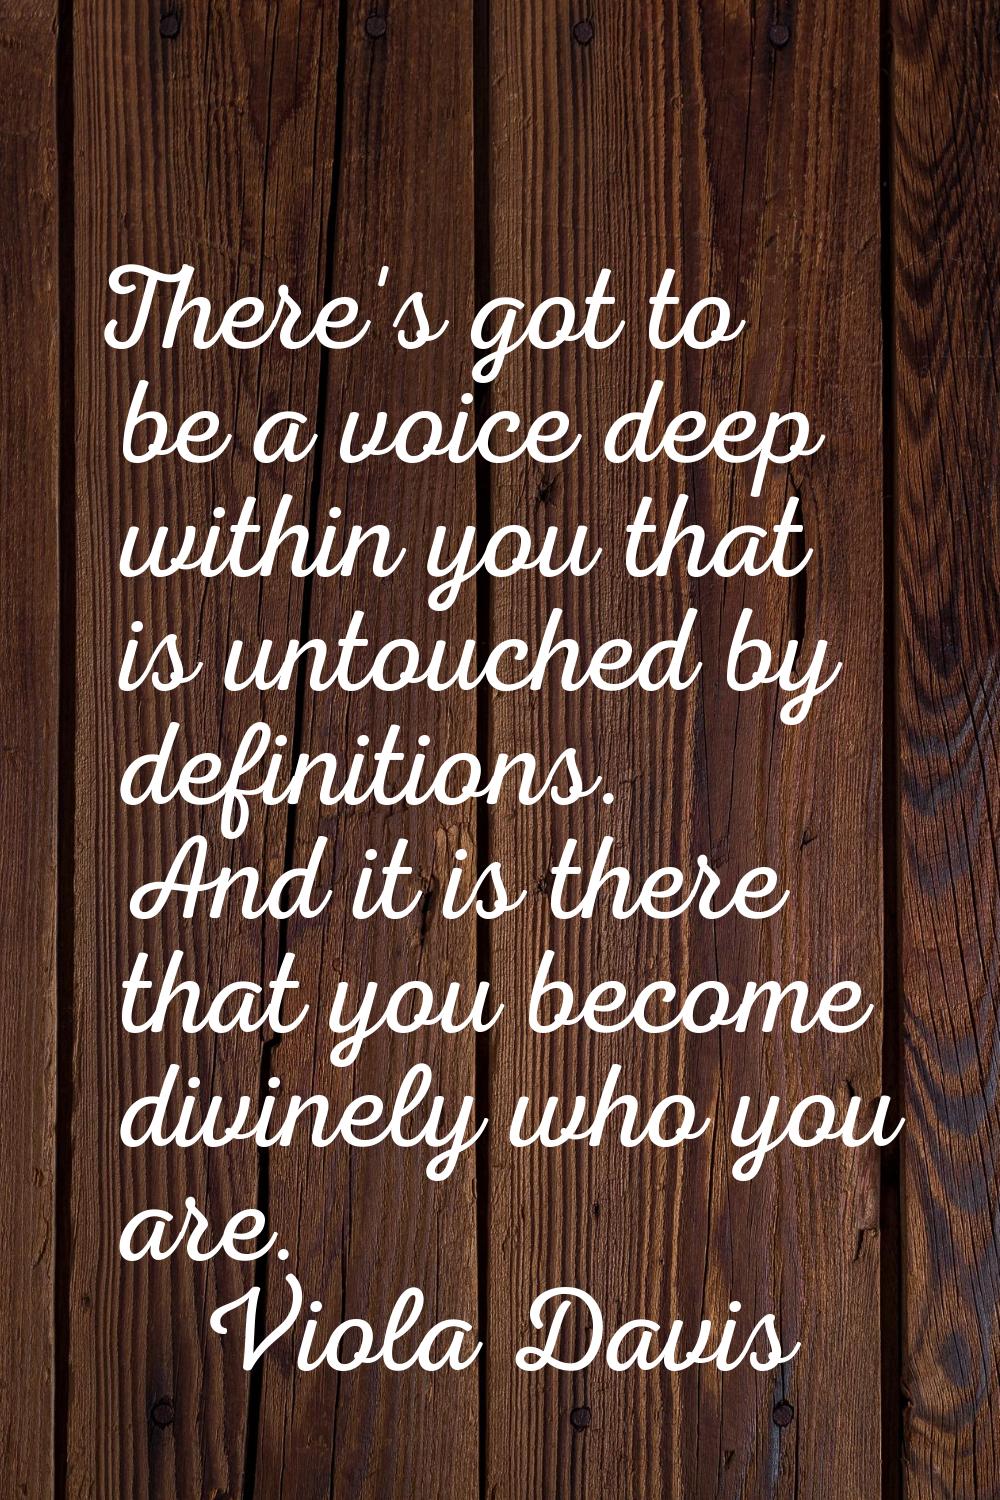 There's got to be a voice deep within you that is untouched by definitions. And it is there that yo